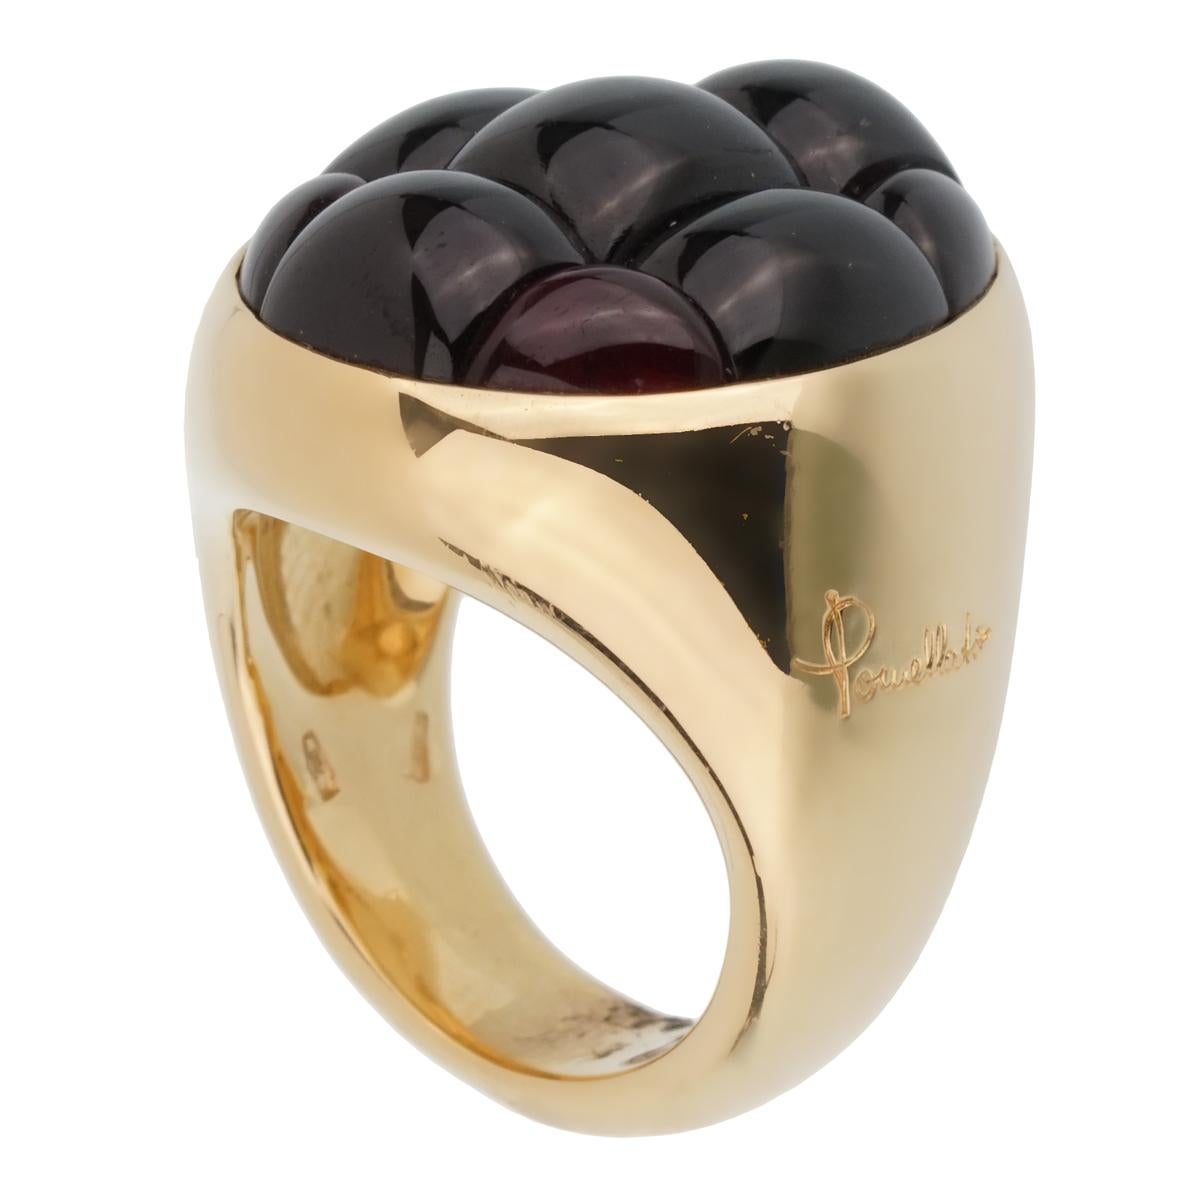 A fabulous brand new Pomellato ring showcasing a 24ct garnet set in shimmering 18k yellow gold. The ring measures a size 6.5 and can be resized.

Retail Price: $9000